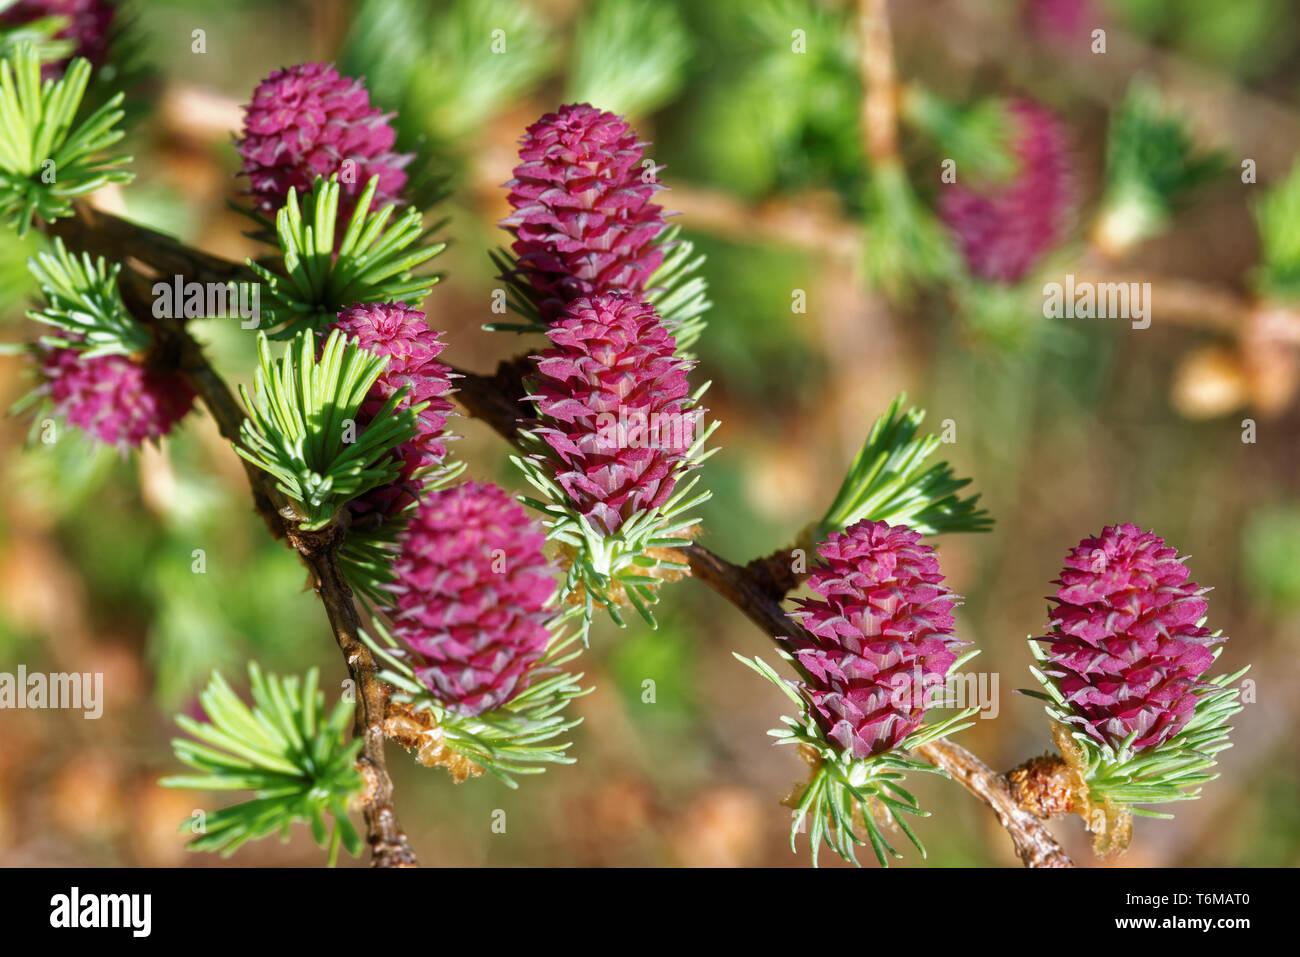 Ovulate cones of larch tree in spring, beginning of May. Stock Photo